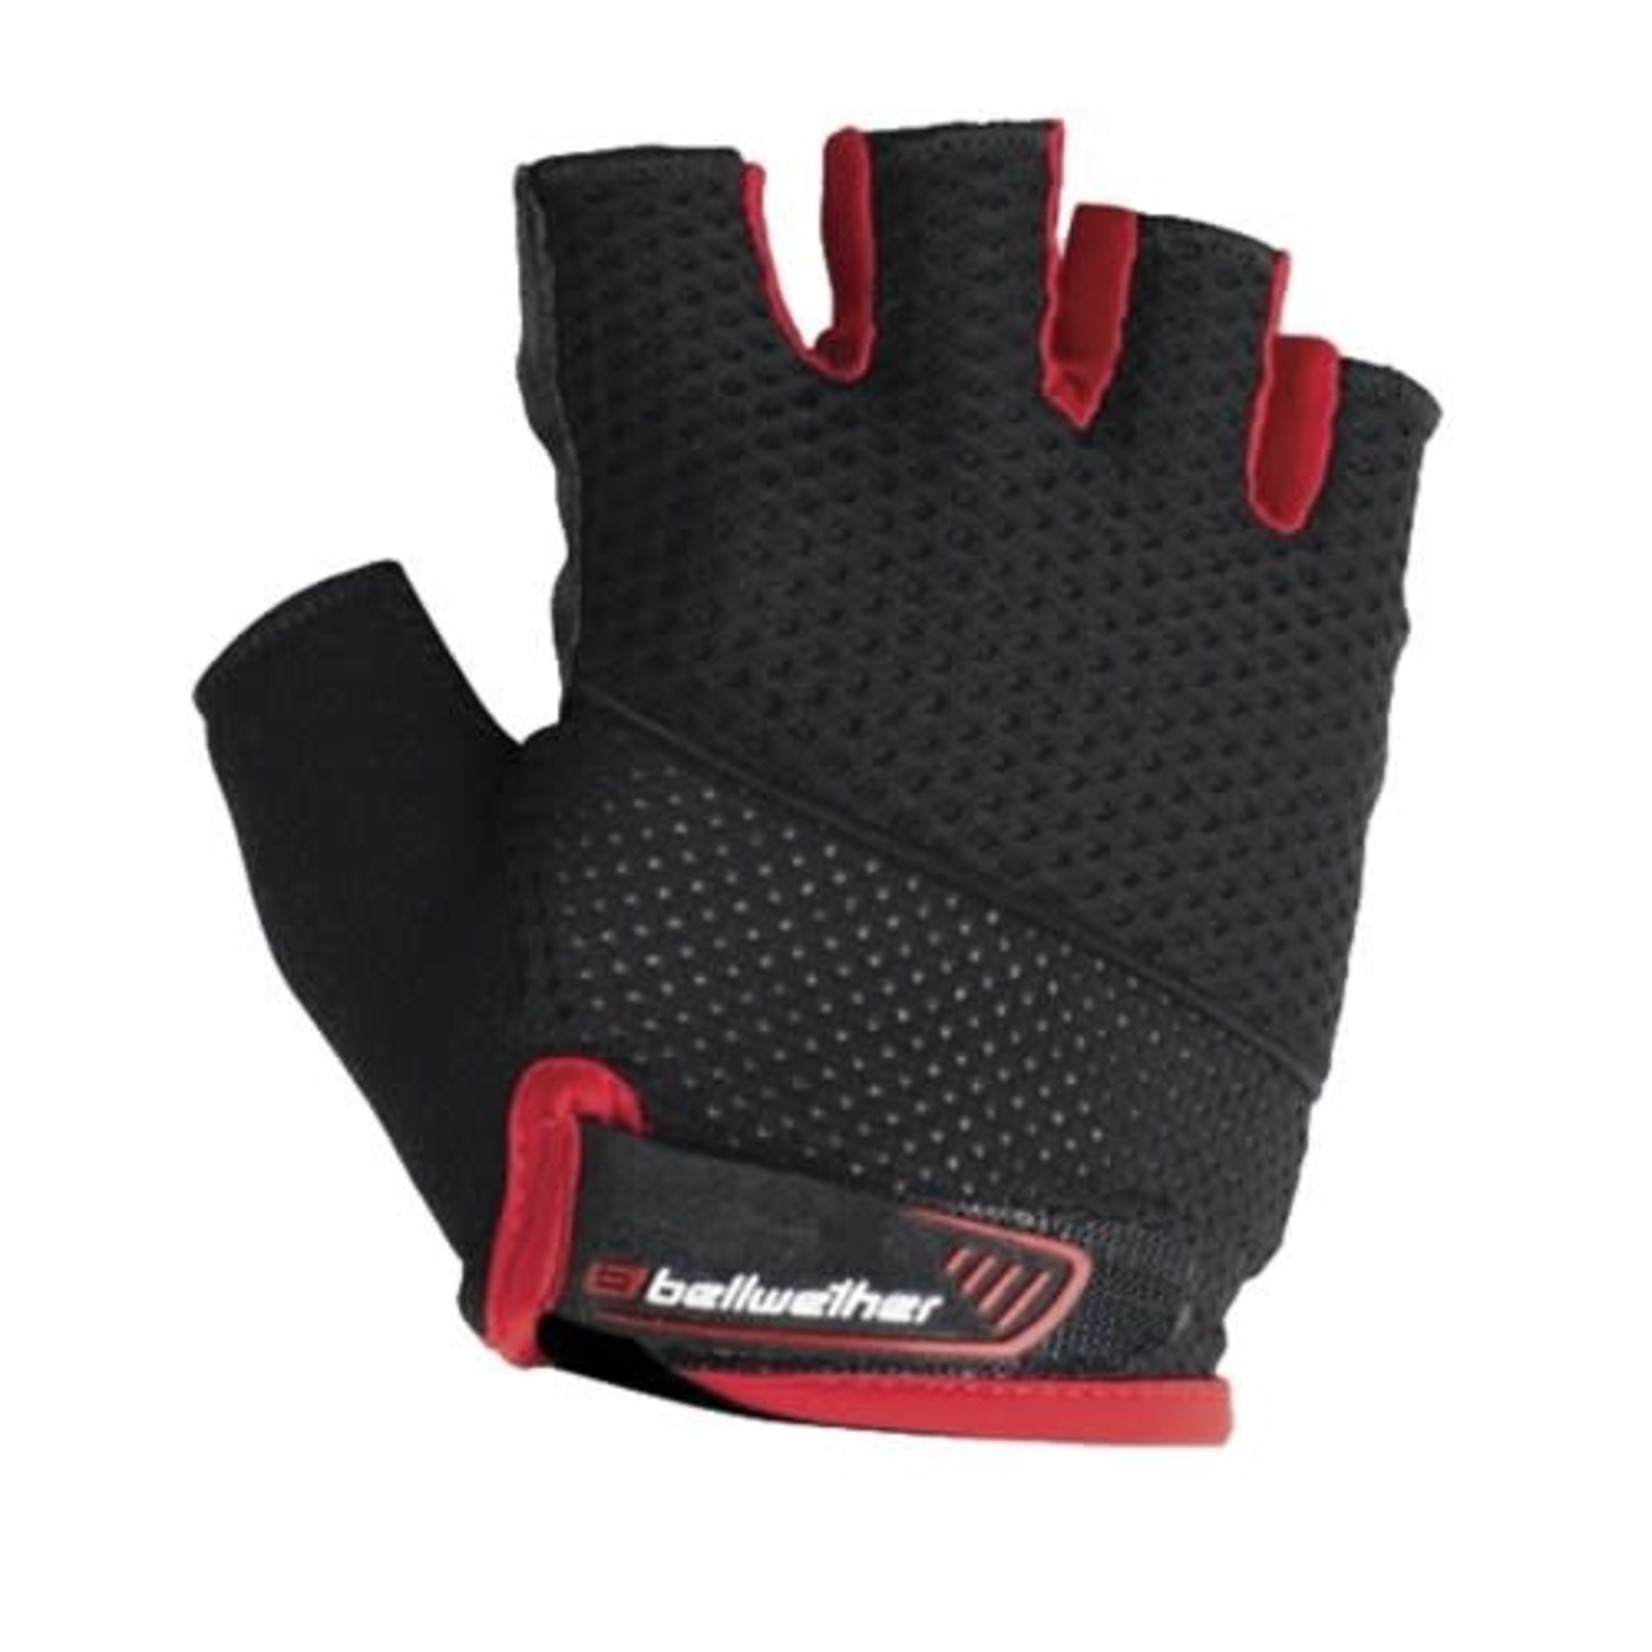 Bellwether Bellwether Cycling/Bike Microfibre Thumb Gloves - Men's Gel Supreme Glove - Red